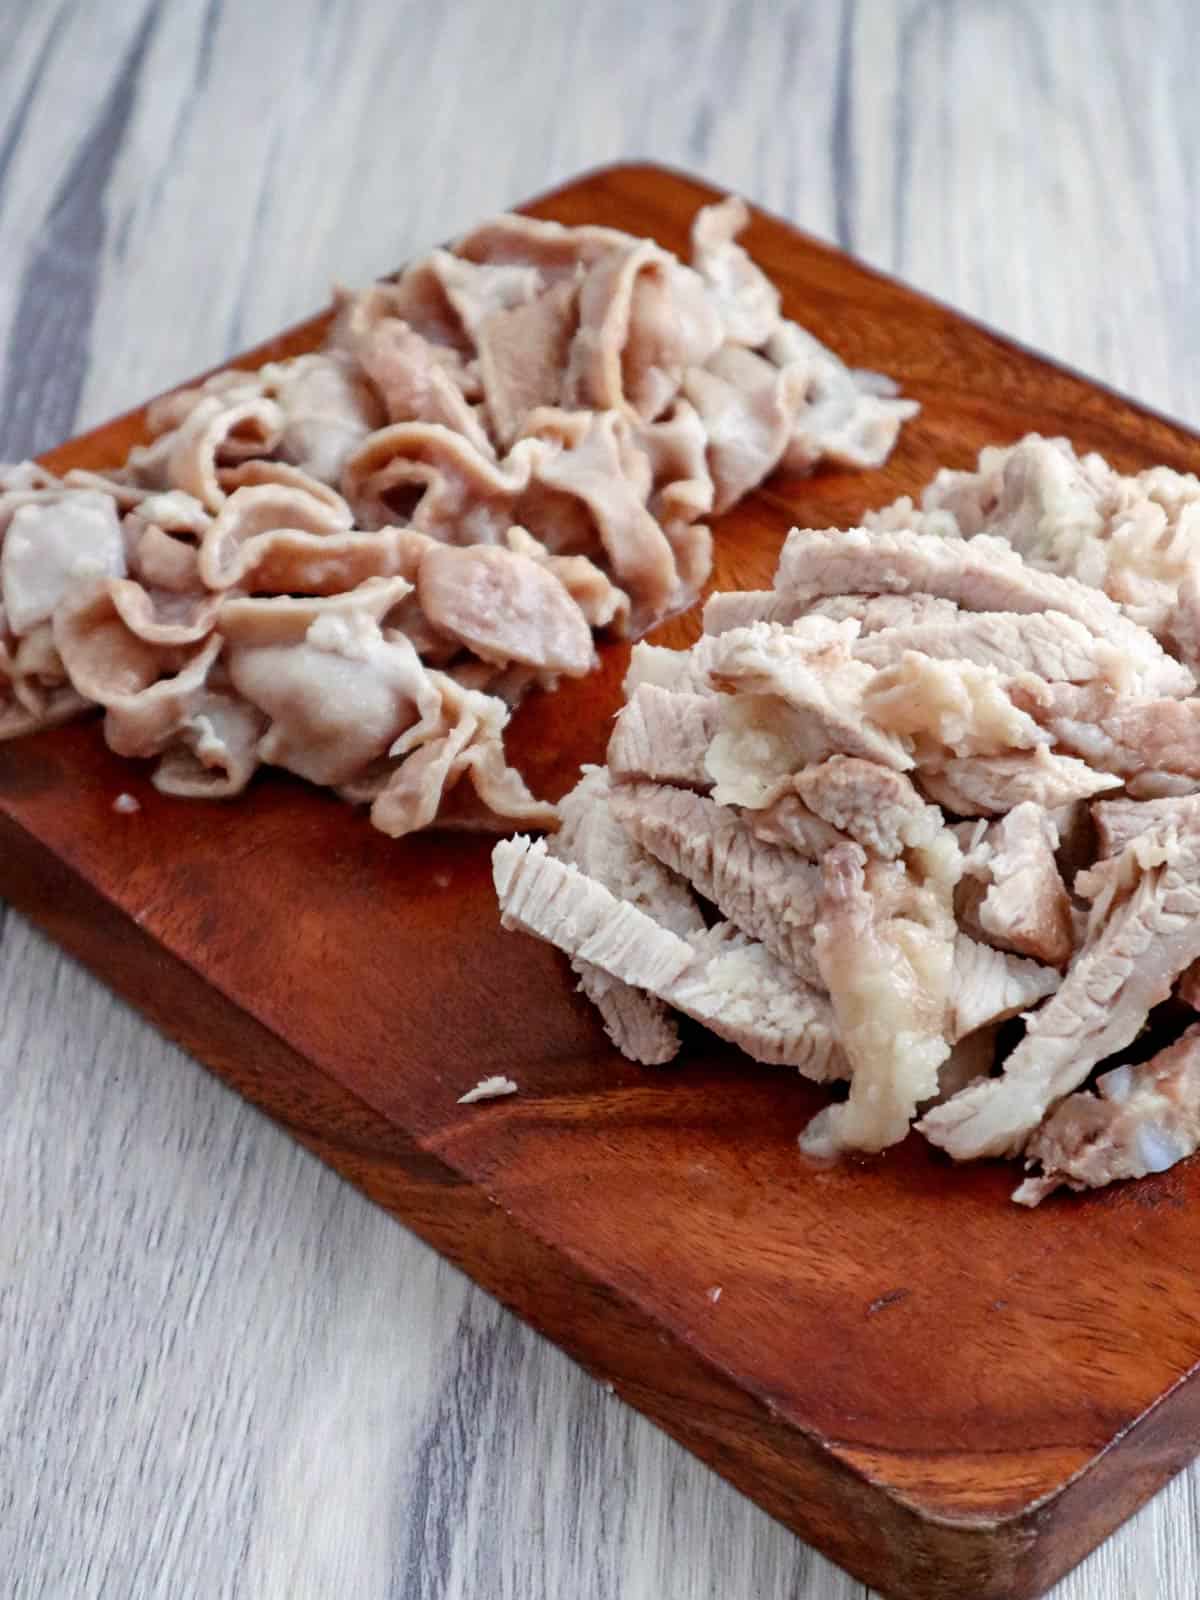 chopped pork meat and innards on a cutting board